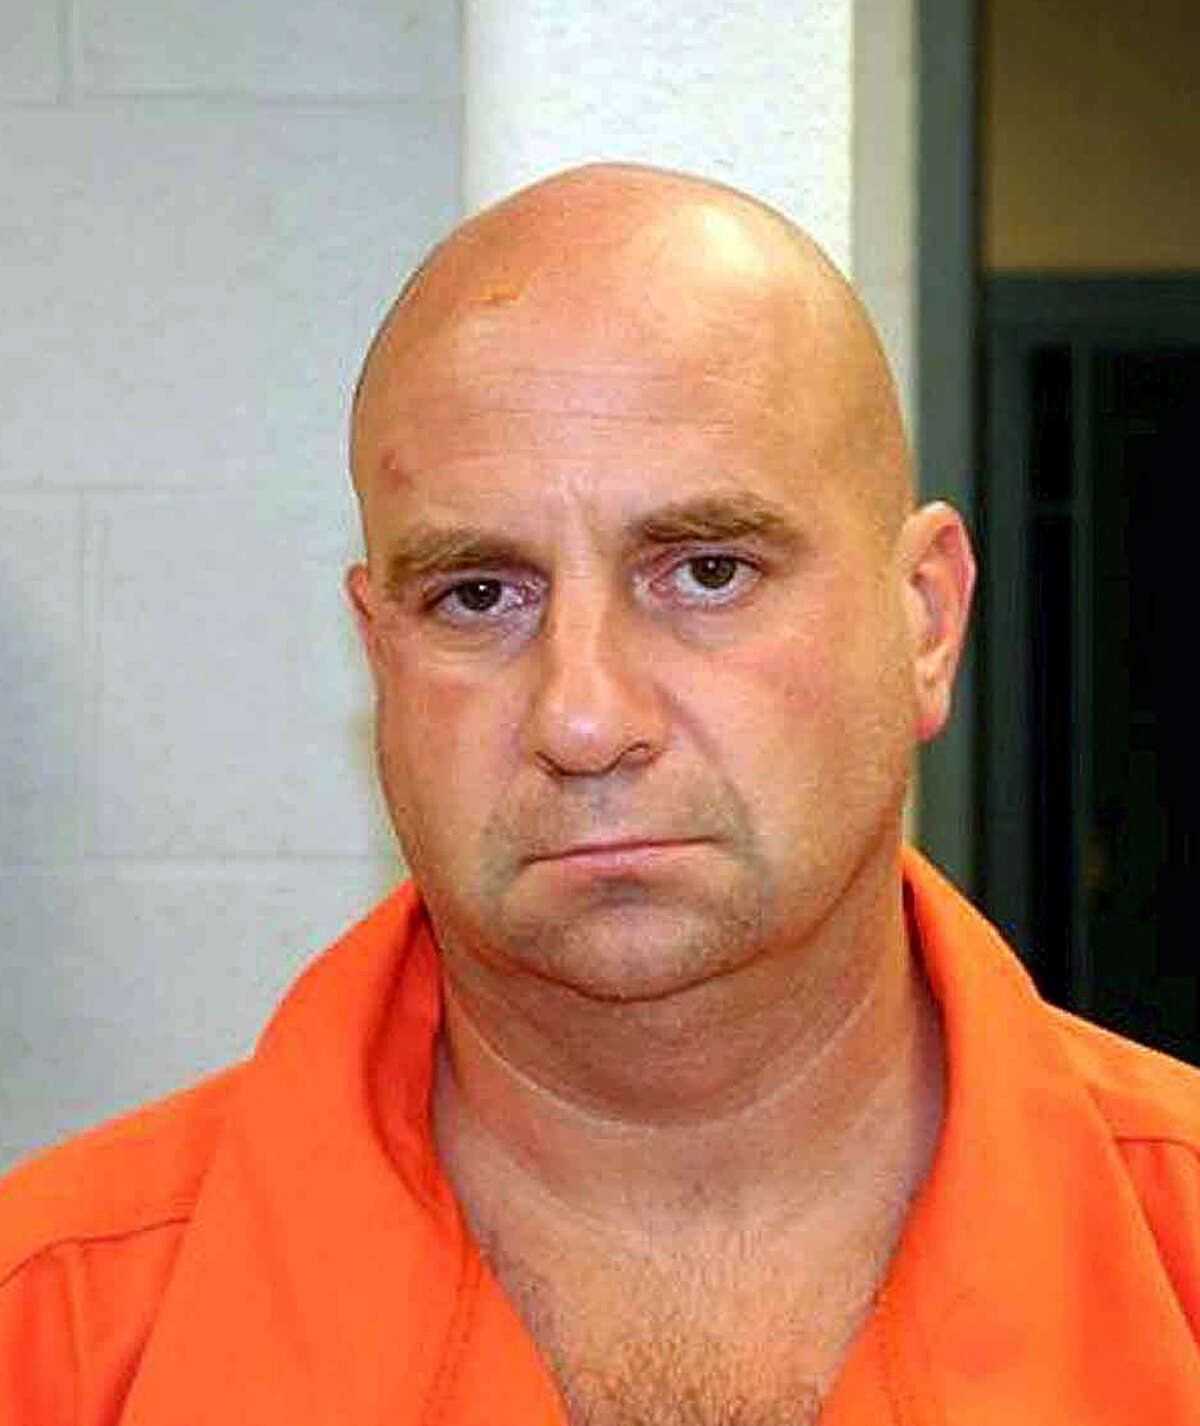 In this file photo provided by the Connecticut State Police, Steven Hayes is shown. A judge has set court sessions over two weeks for presenting evidence to a jury that will decide life-or-death punishment for Hayes, who was convicted in three home invasion killings. In a letter to the Hartford Courant, Haynes now says he wants to be executed.